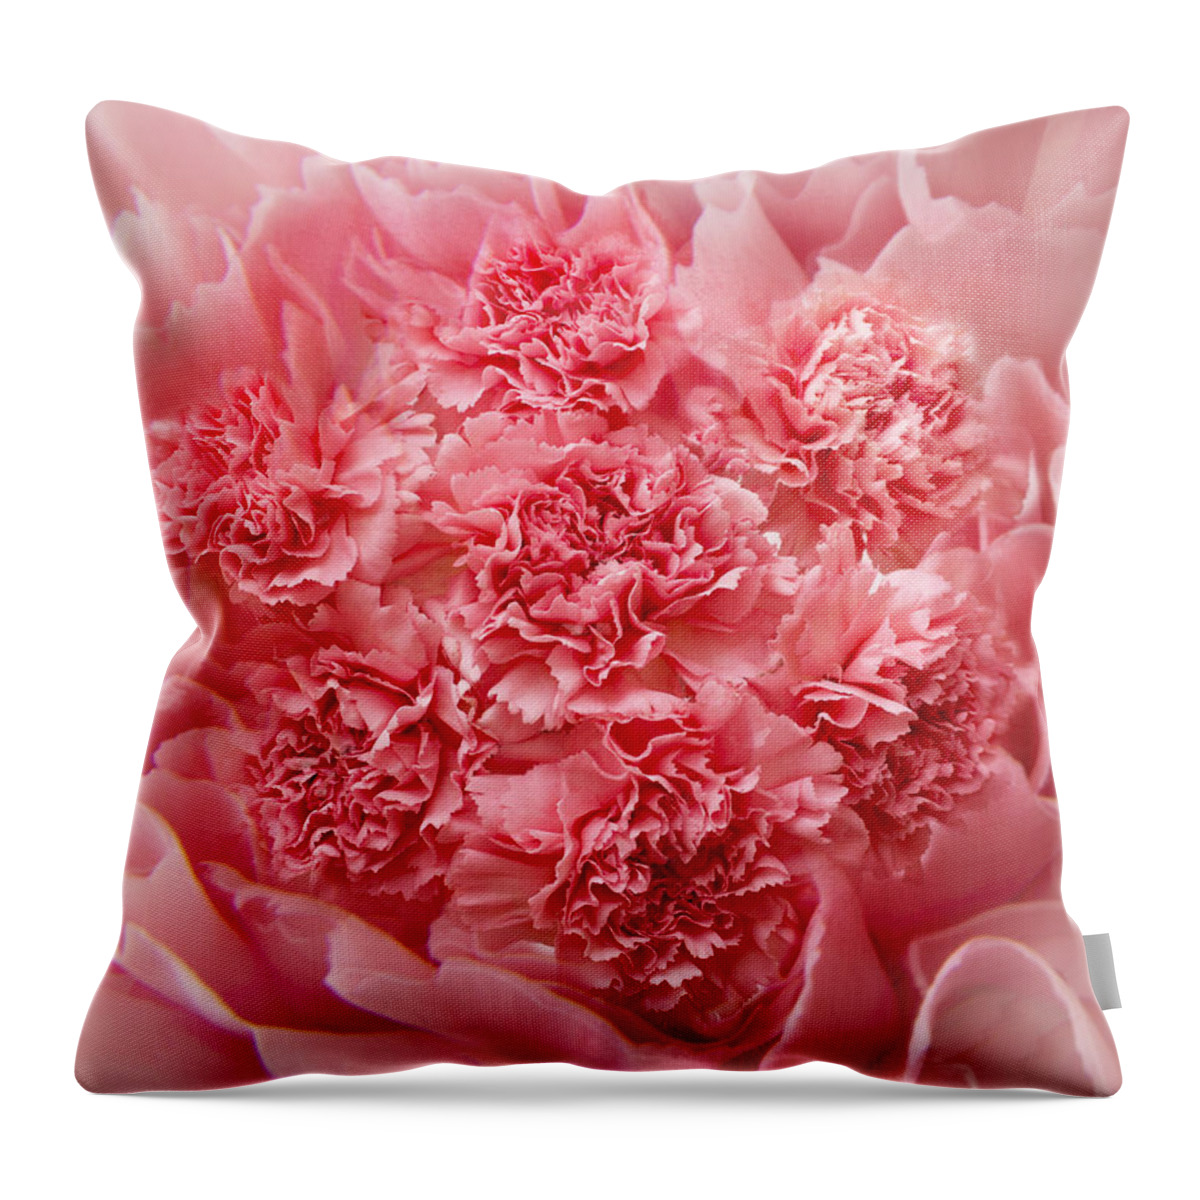 Pink Carnations Throw Pillow featuring the photograph Carnations by Marina Kojukhova